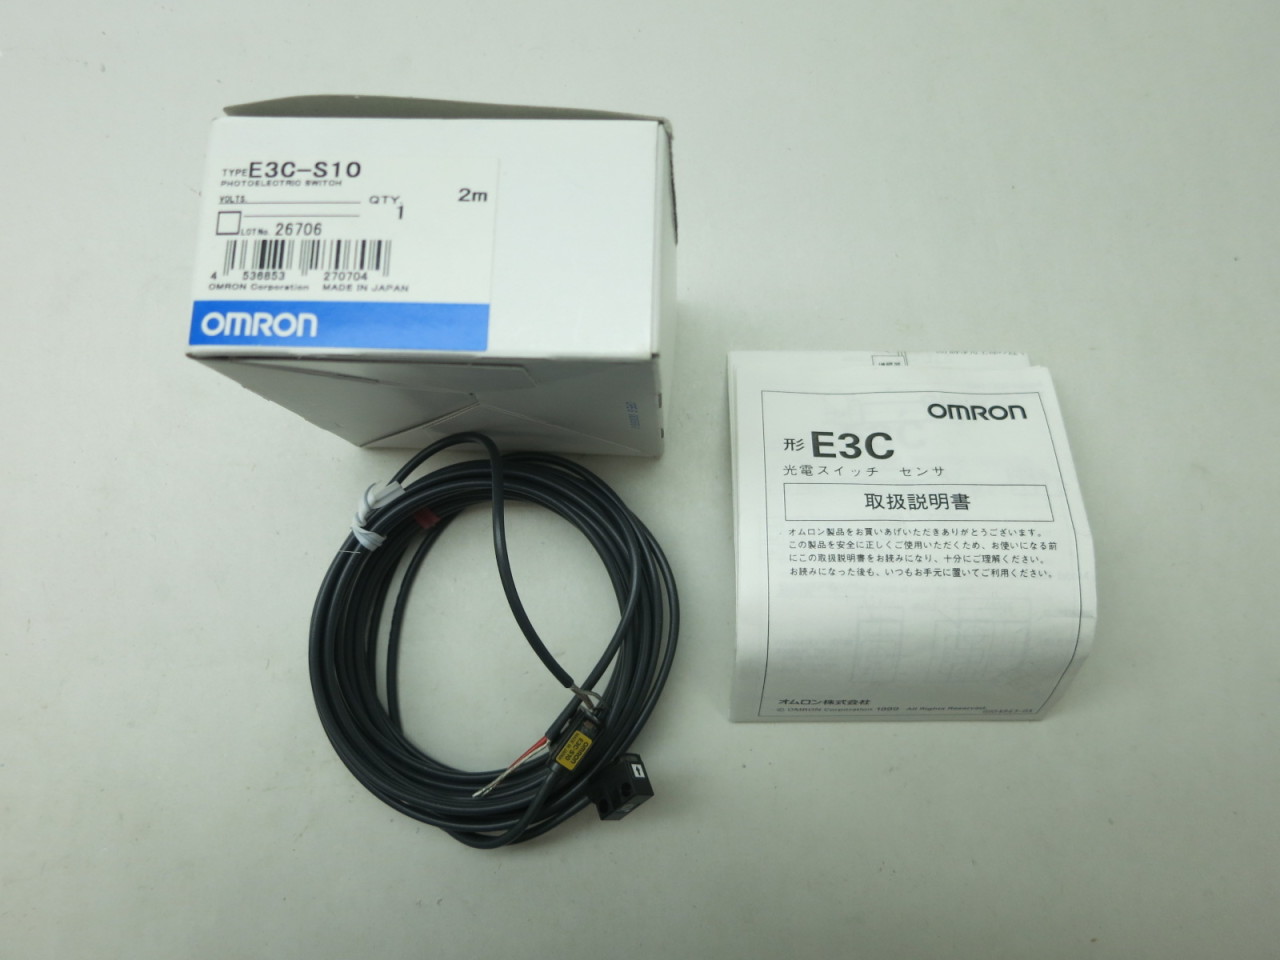 New In Box Omron E3C-S10 Photoelectric Sensor Switch 